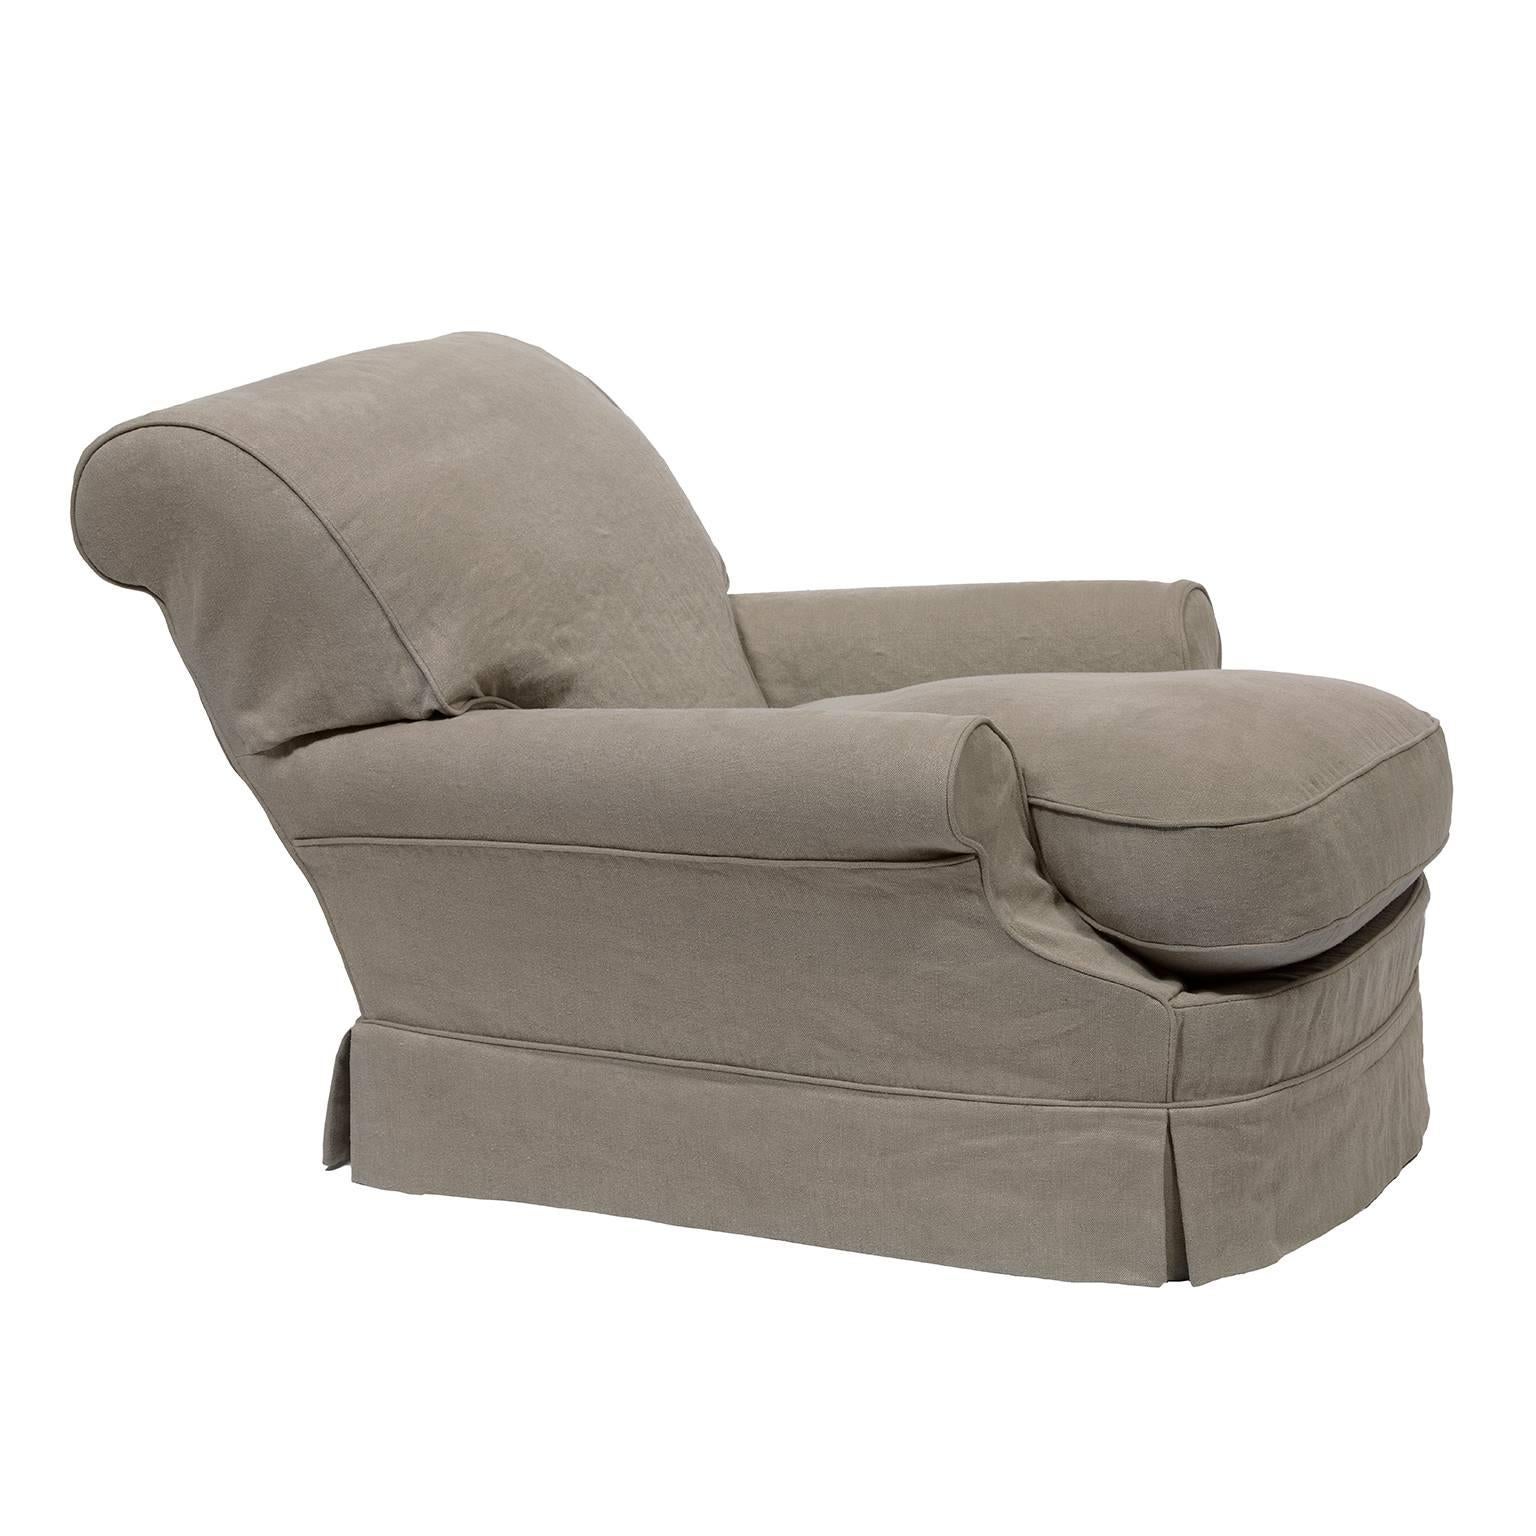 Made by am designs. High quality handmade club in Belgium with seat cushion, ultra-comfortable. Price including slipcover. Fabric shown pure gray. Fabric needs to be ordered separately.